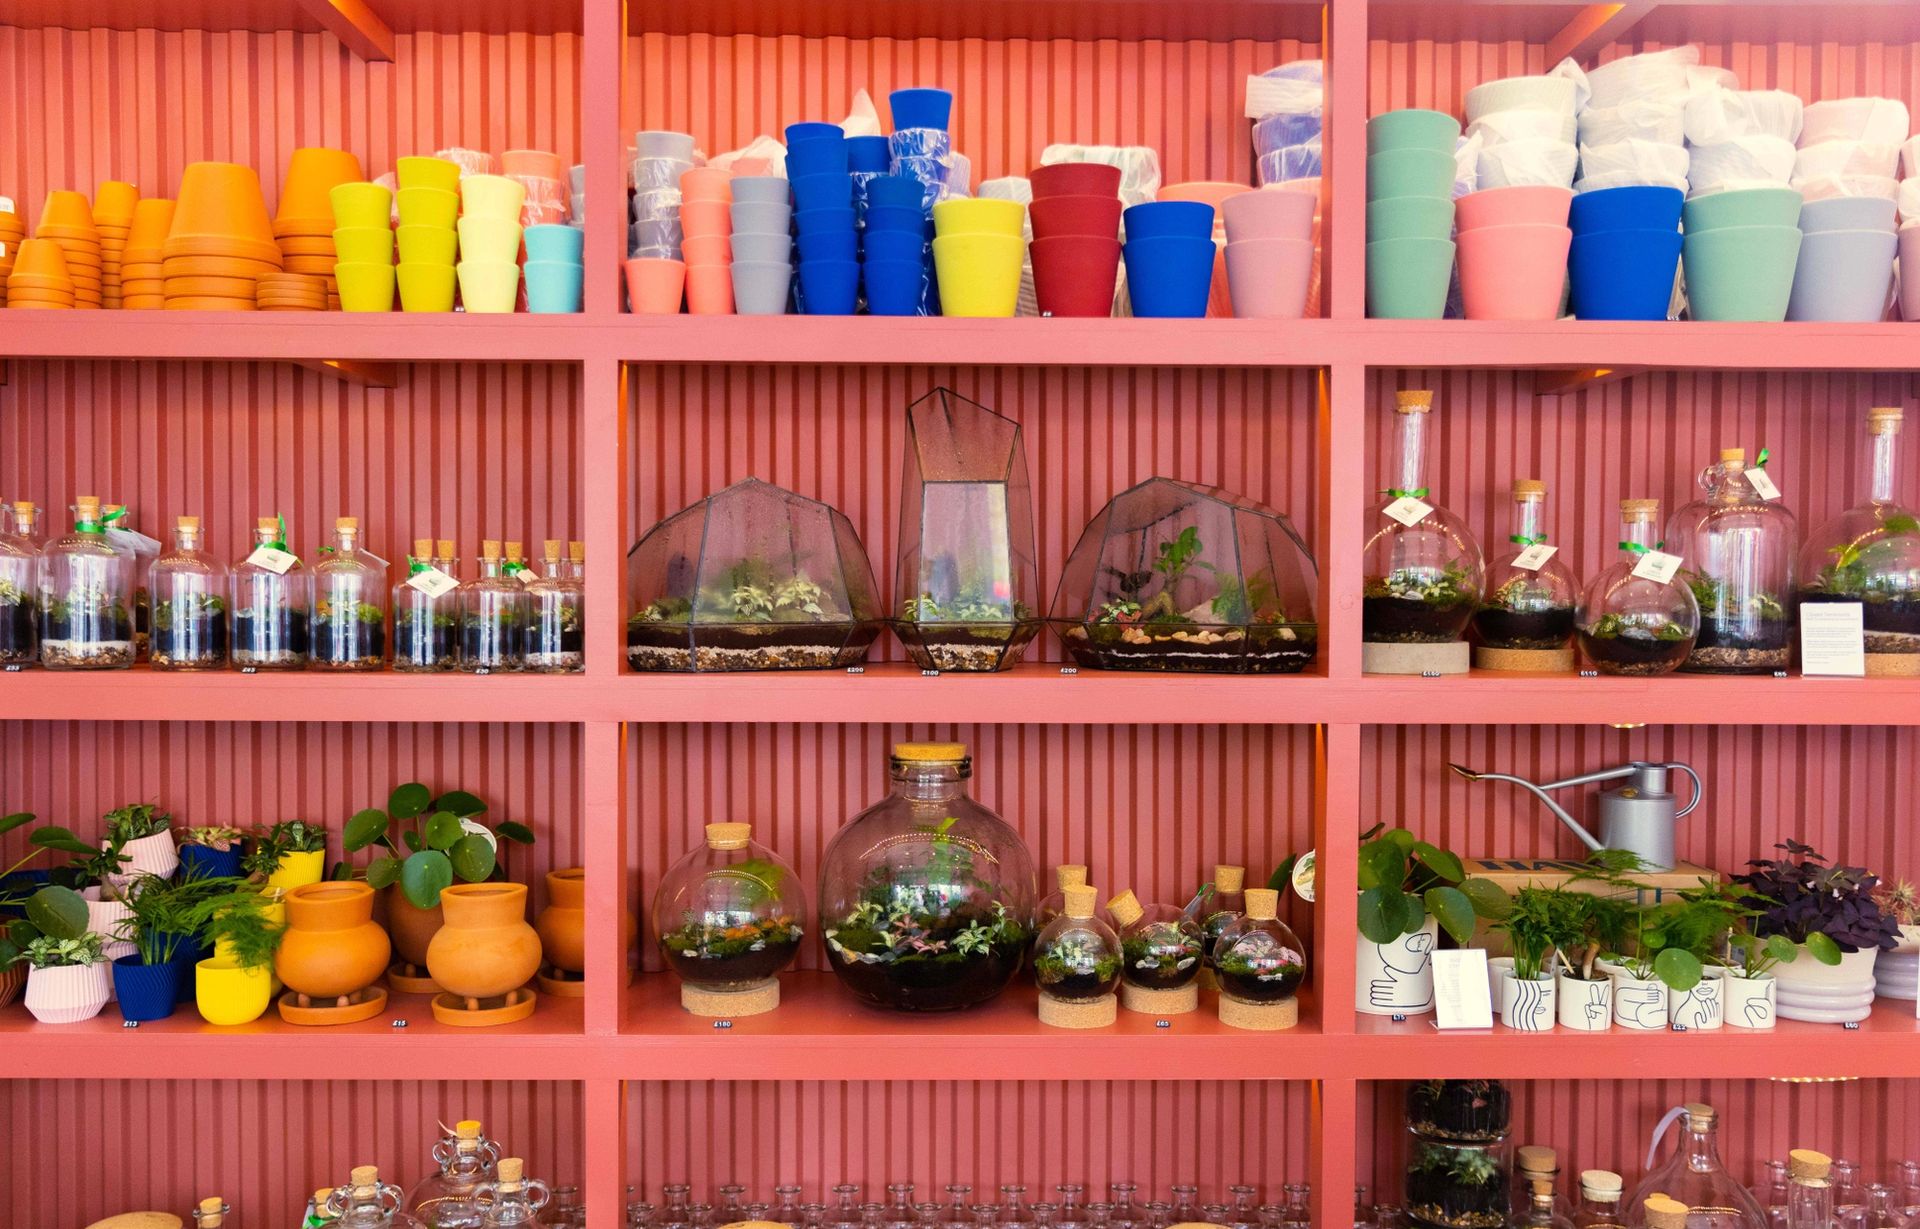 Brightly coloured pots and terrariums on pink shelves